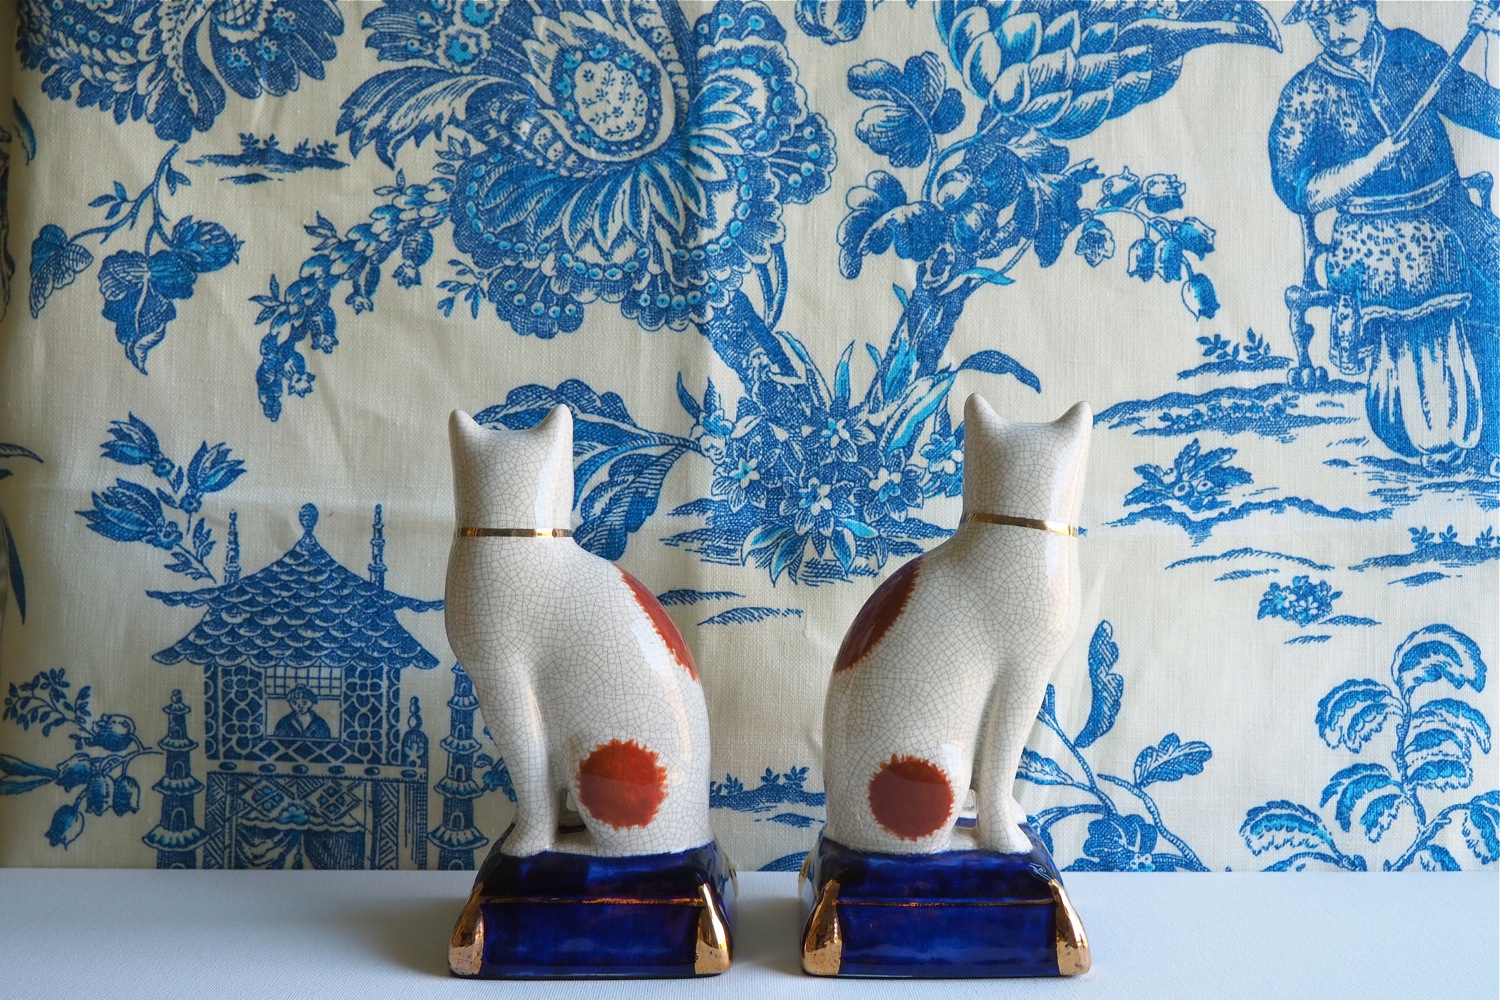 flatten the curve, flatten the coronavirus curve, flatten the COVID-19 curve, flatten the coronavirus COVID-19 curve, coronavirus pandemic 2020, Vintage Finds Fitz and Floyd Mantle Cats, Vintage Fitz & Floyd Japanese Ceramic Mantle Cats, Chinoiserie mantle cats, blue and white mantle cats, vintage chinoiserie blue and white mantle cats, 